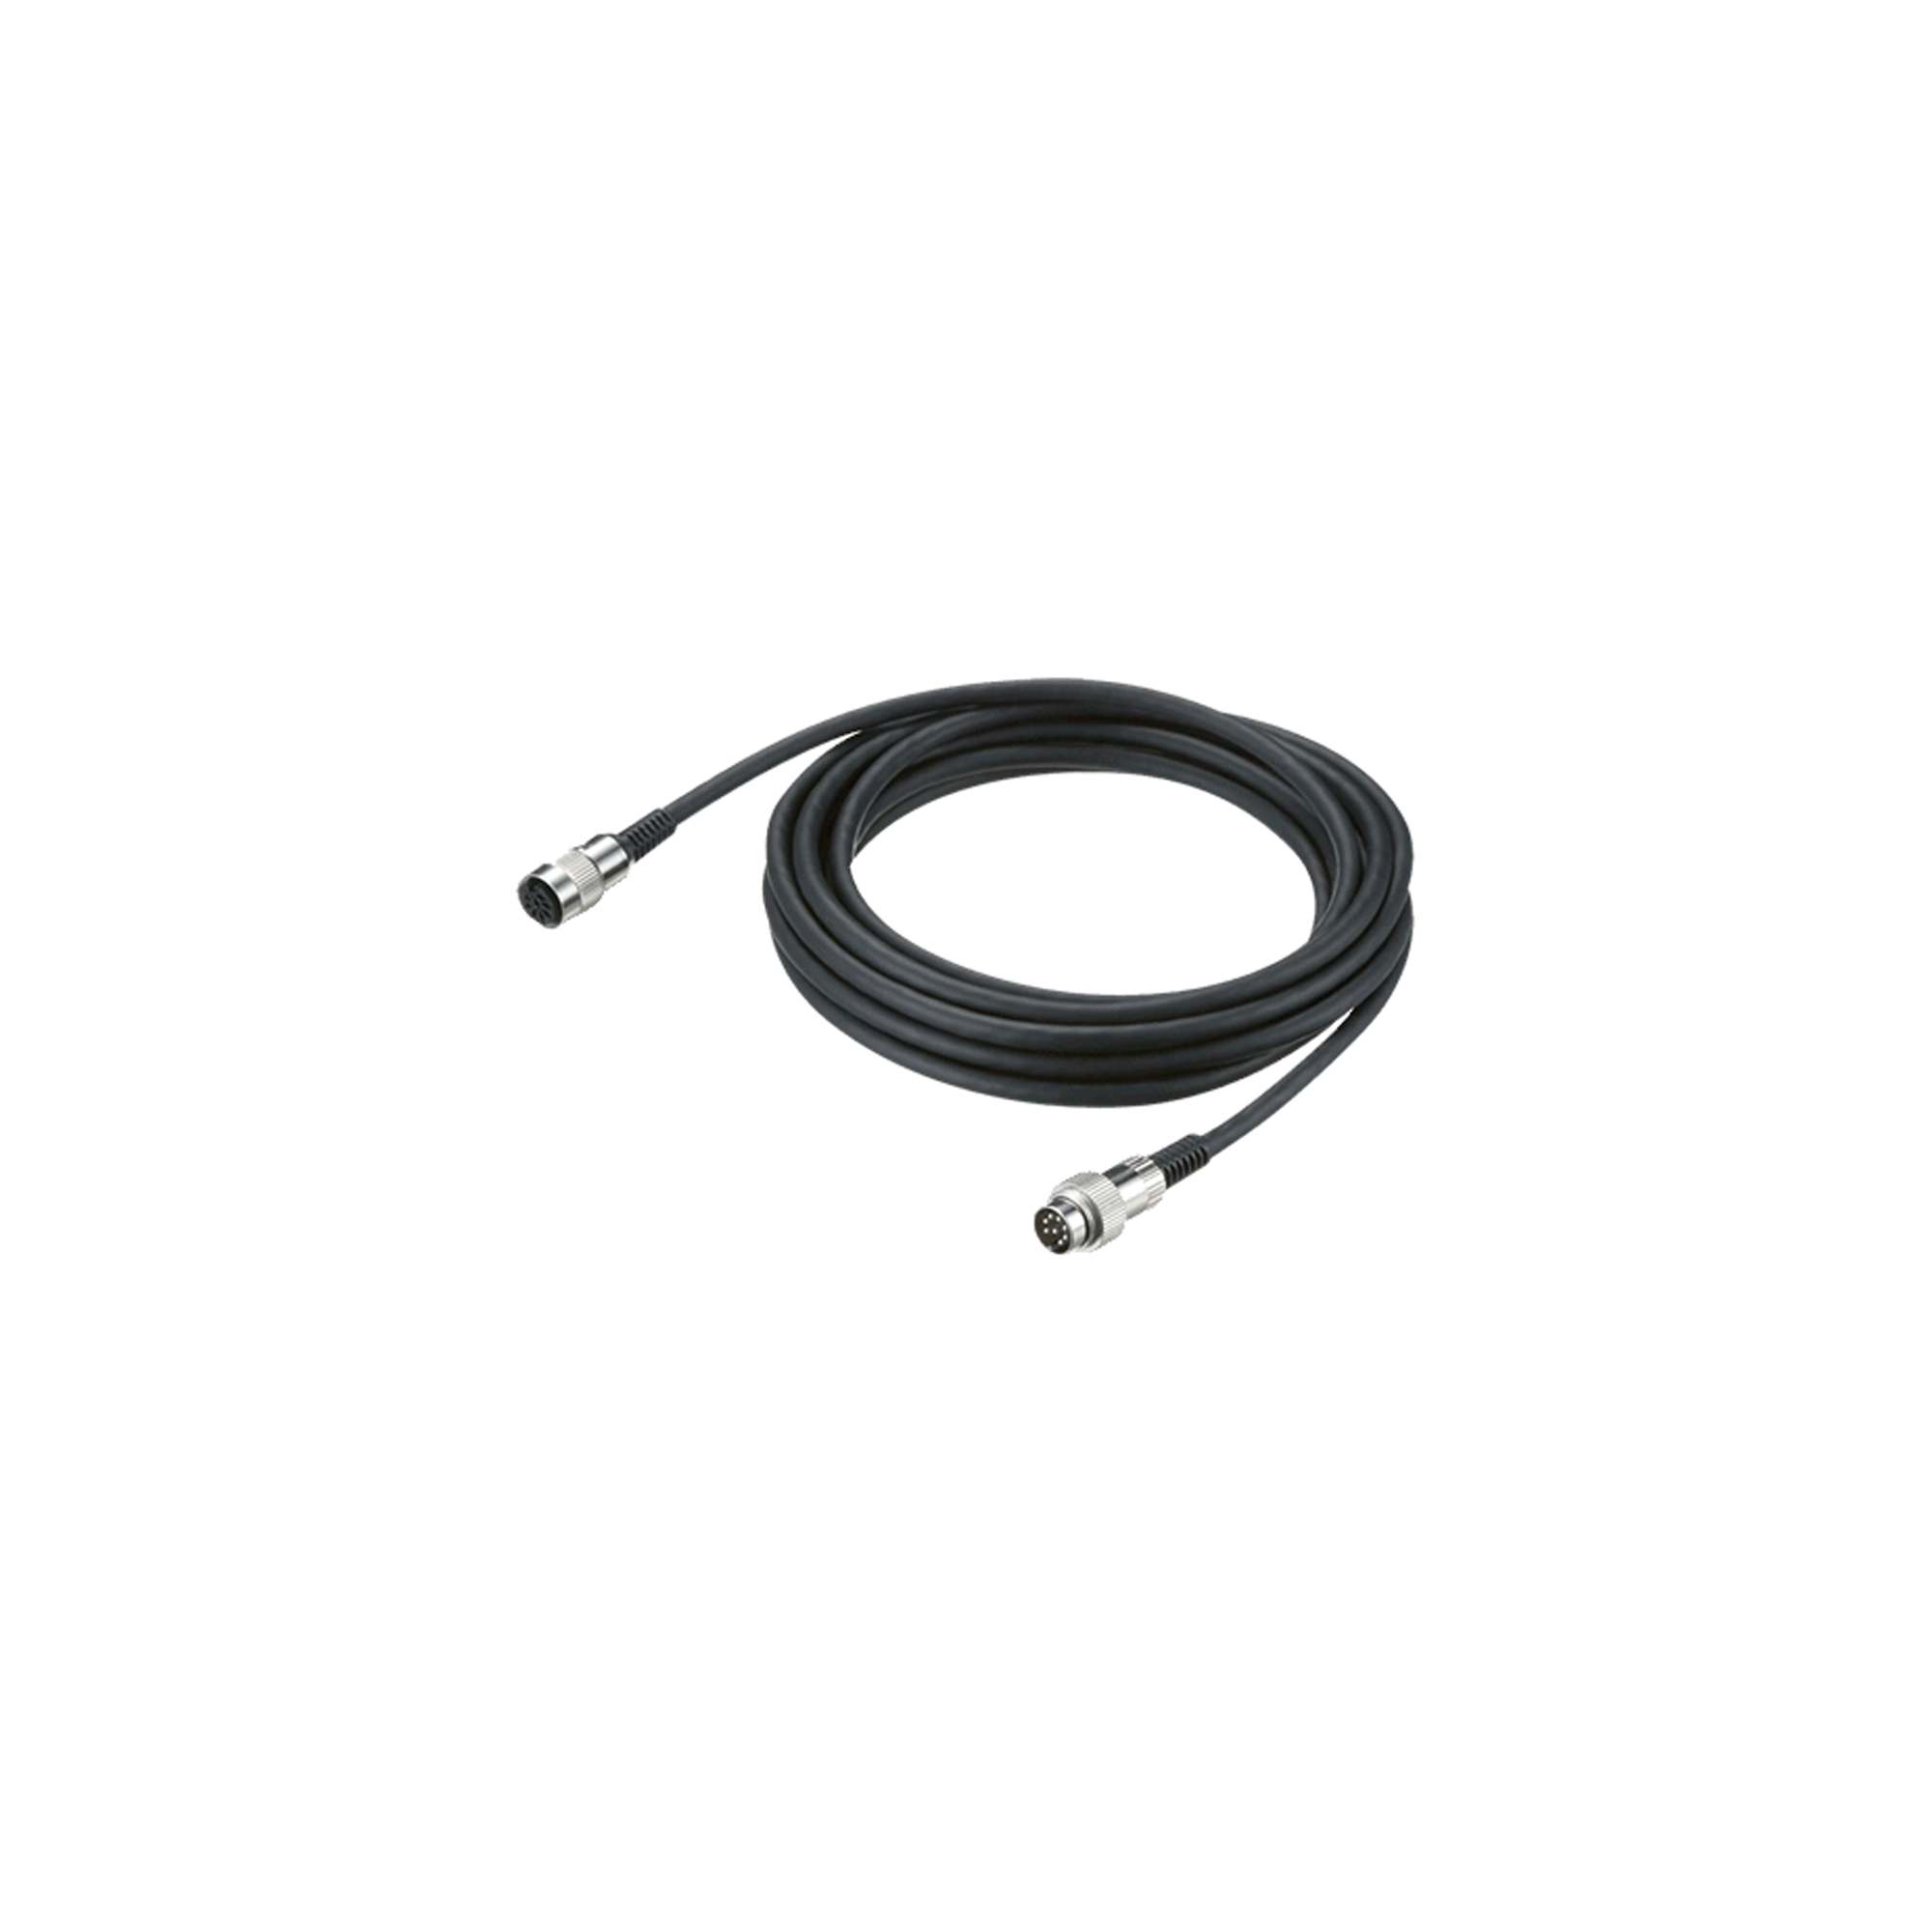 Libec 5m/16.5' control cable for REMO30, LANC and monitor